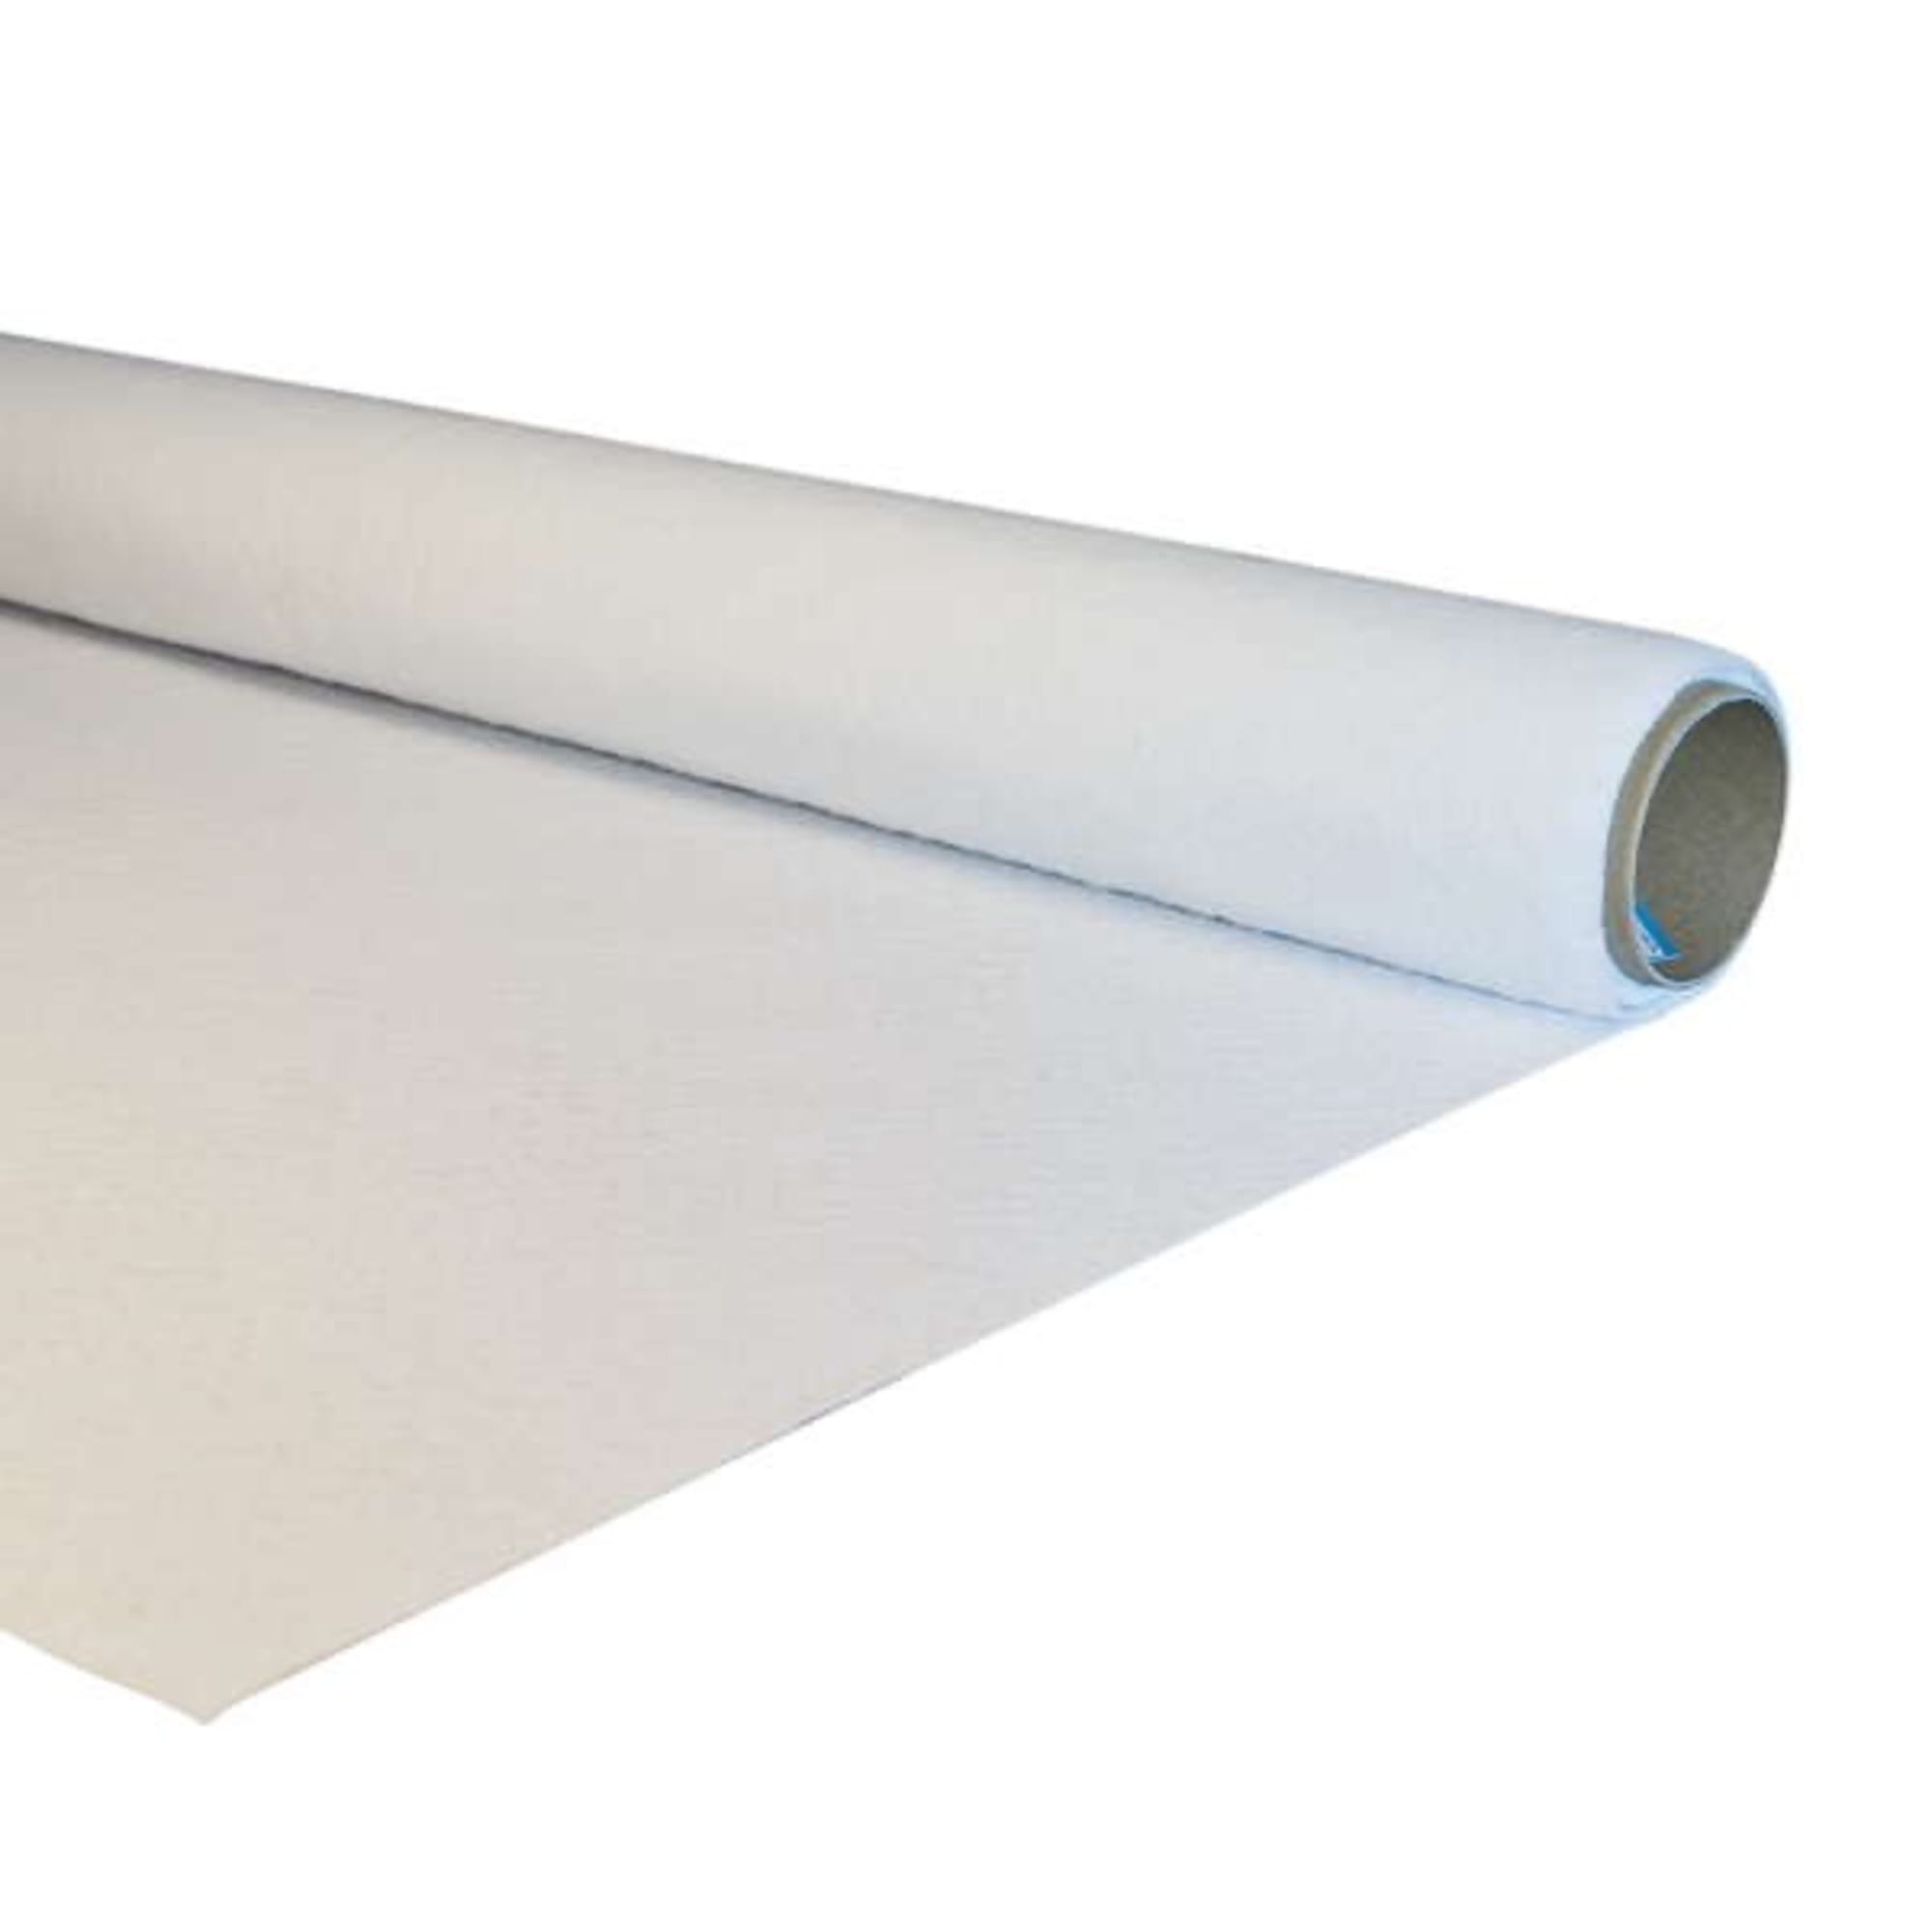 Breatex™ Non-woven absorber 150 g/m² , image 2